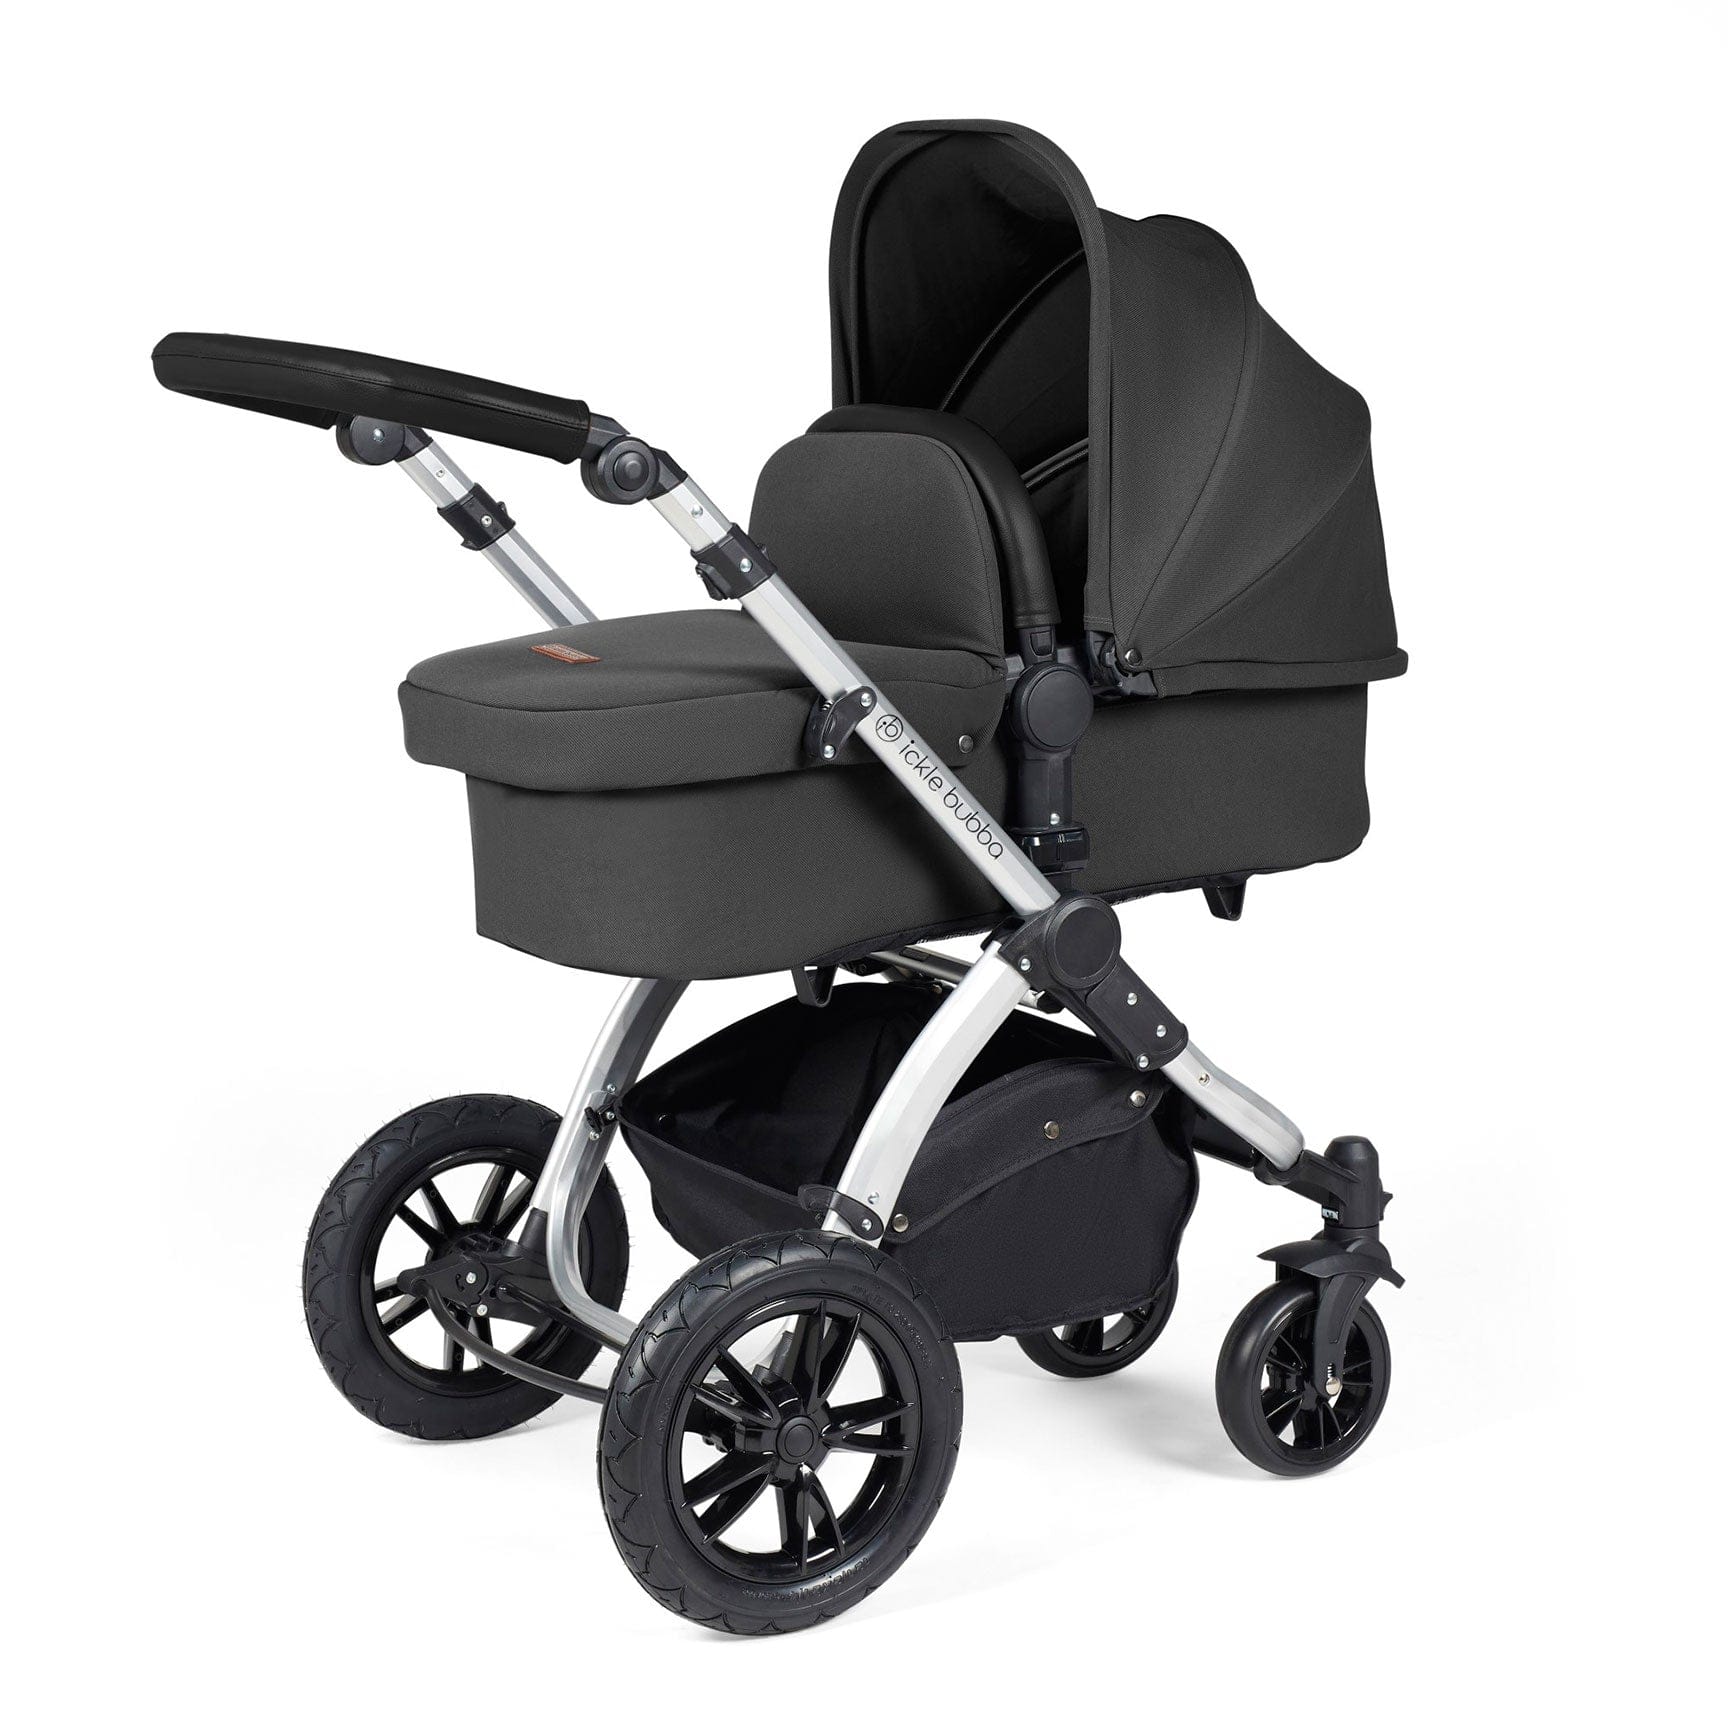 Ickle Bubba travel systems Ickle Bubba Stomp Luxe 2 in 1 Plus Pushchair & Carrycot - Silver/Charcoal Grey/Black 10-003-001-254